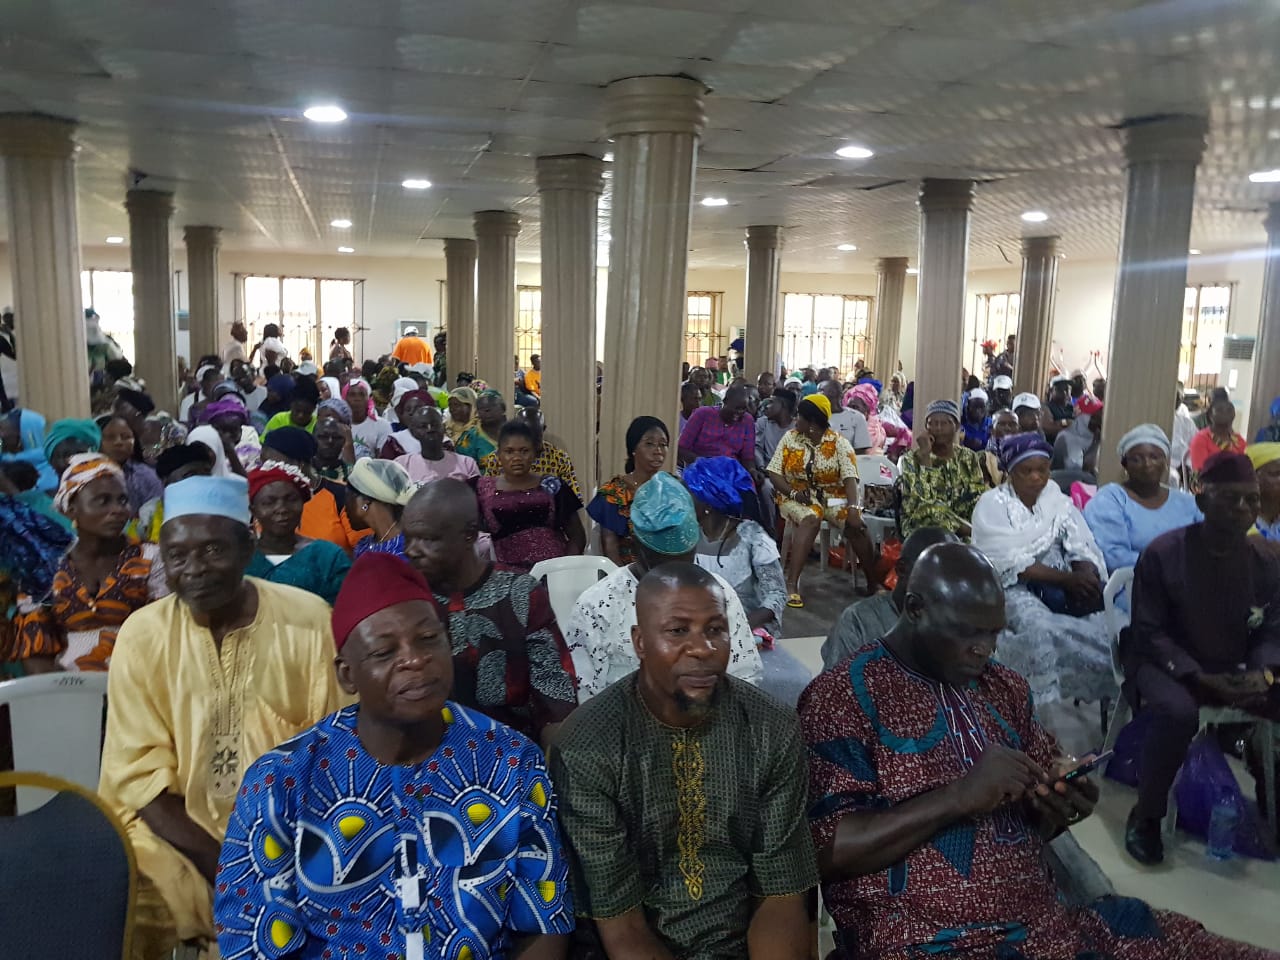 Members of the community at the event to endorse Olufemi Ajadi